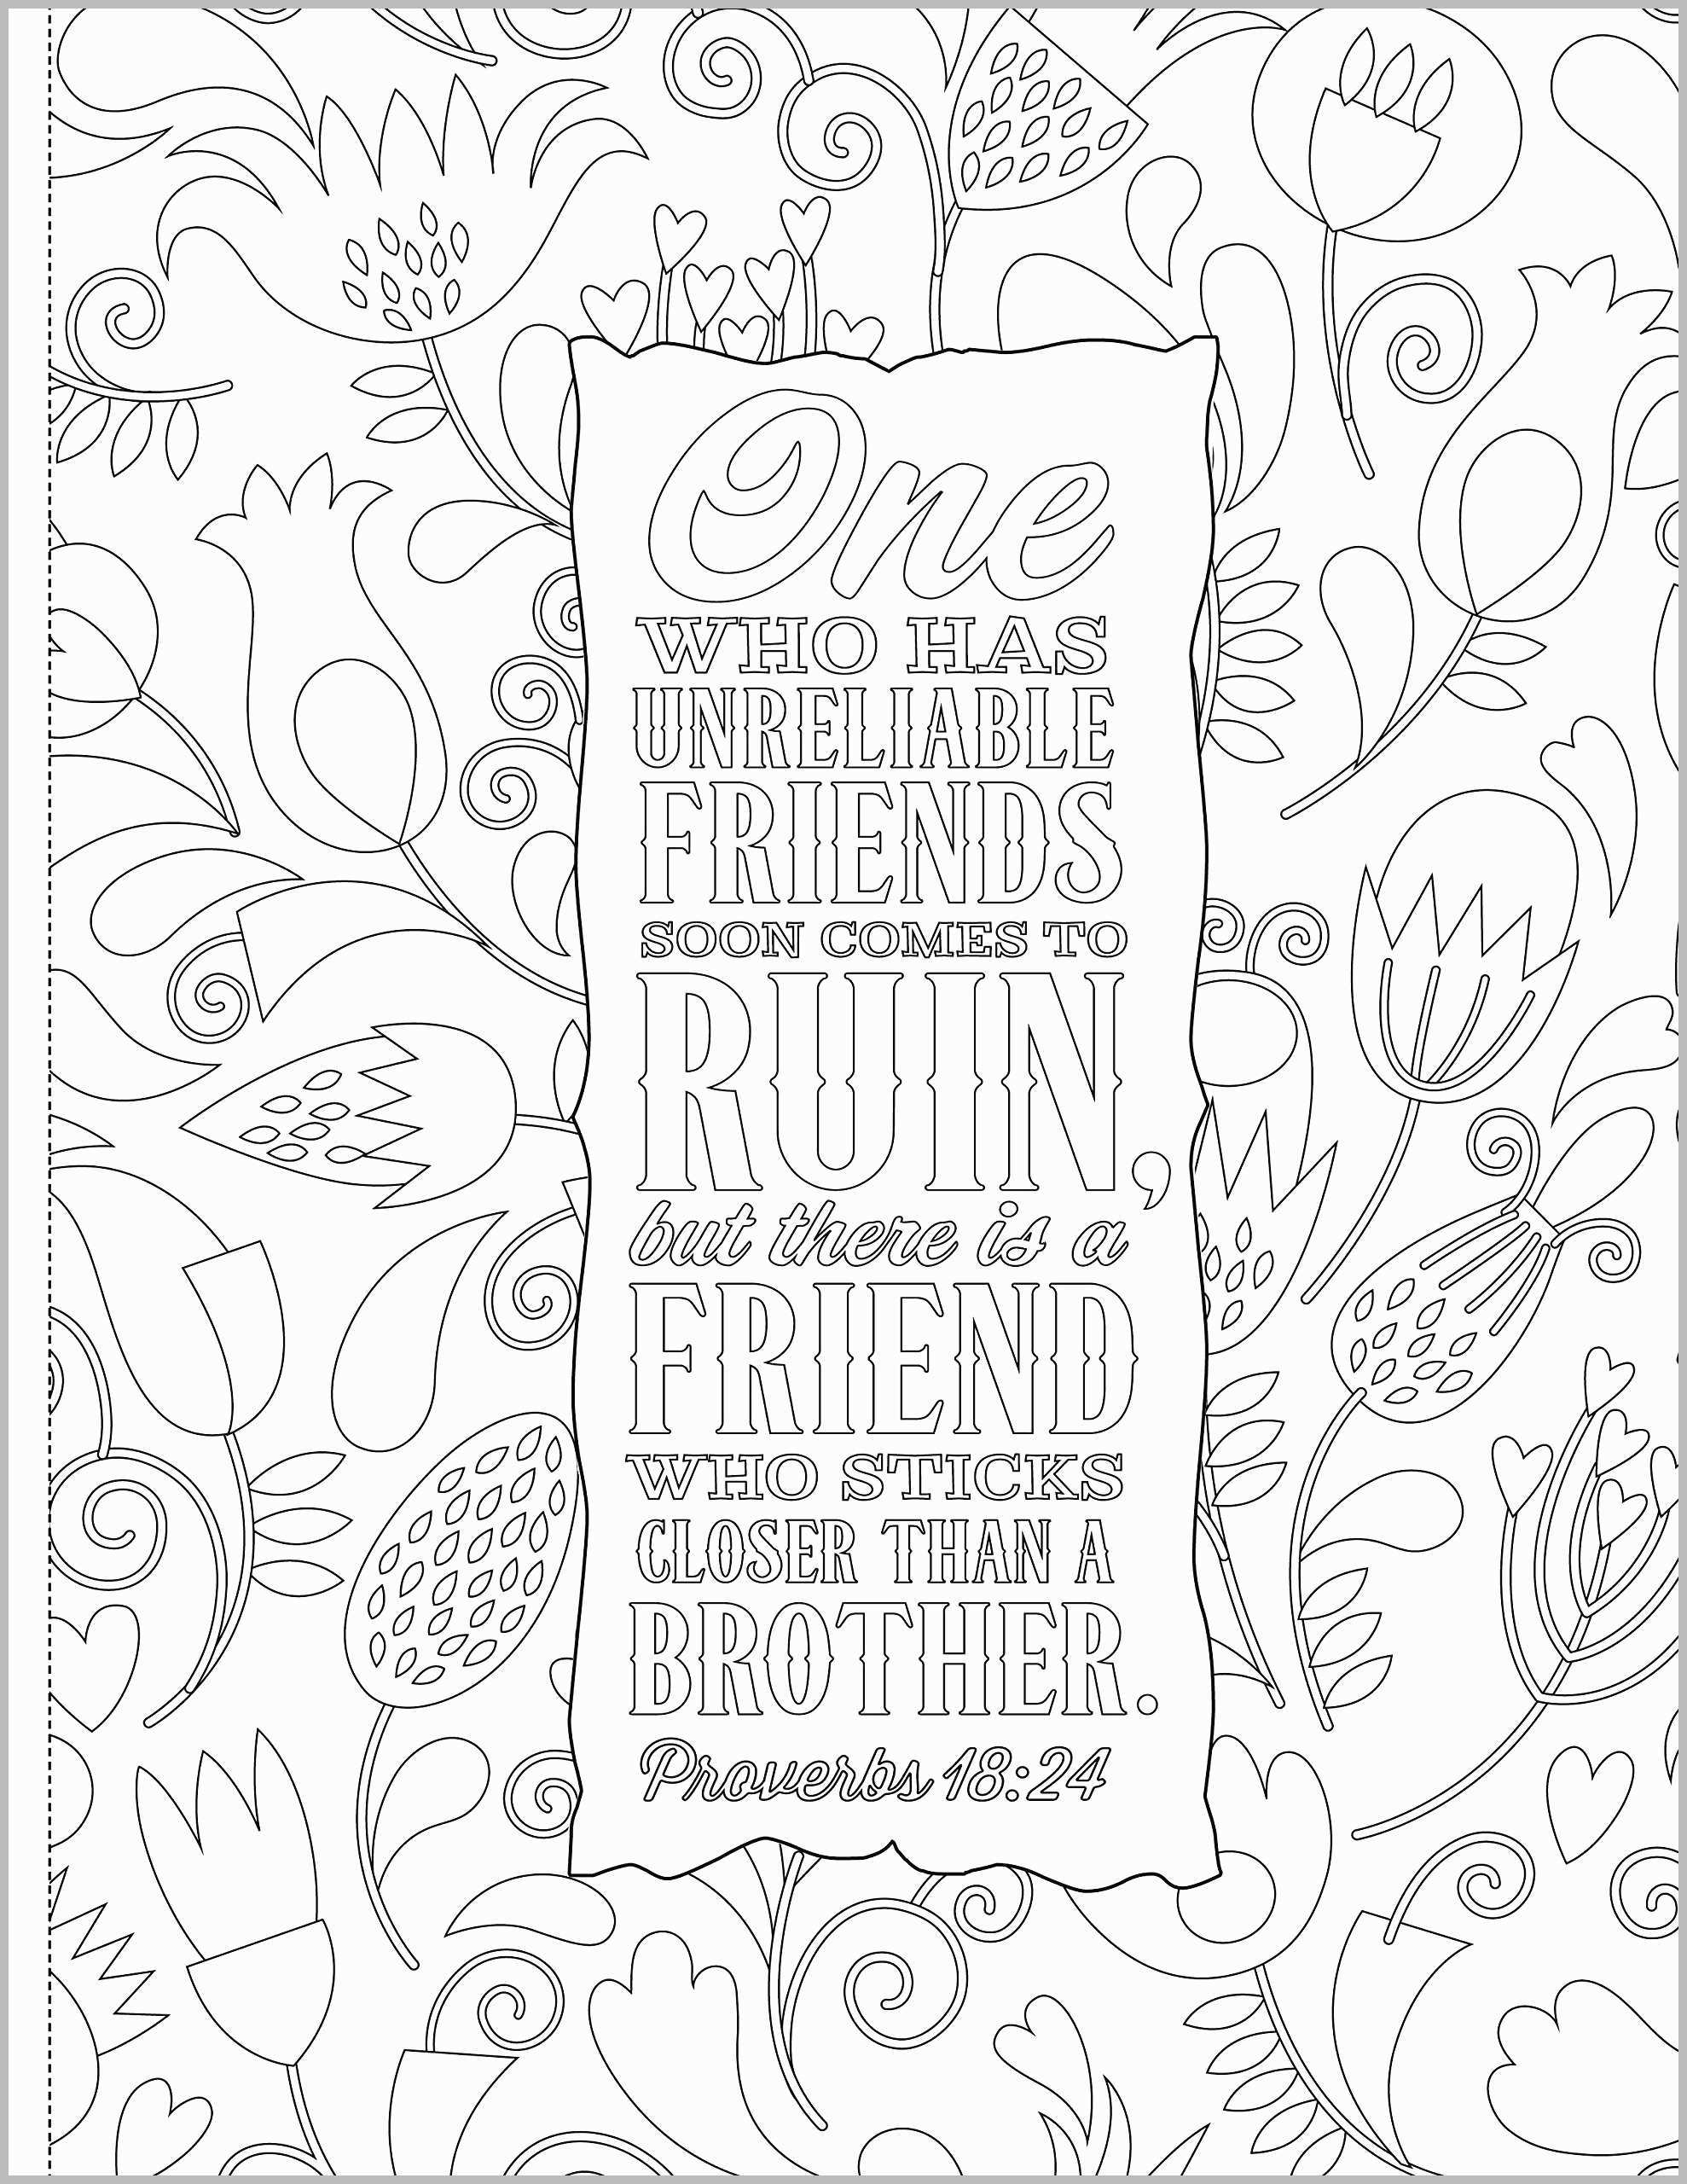 Awesome Bible Verse Coloring Sheet Freee Pages With Scriptures Verses For  Kids Activity Verseeets Free Printable Patience Fourth Of July –  Samsfriedchickenanddonuts